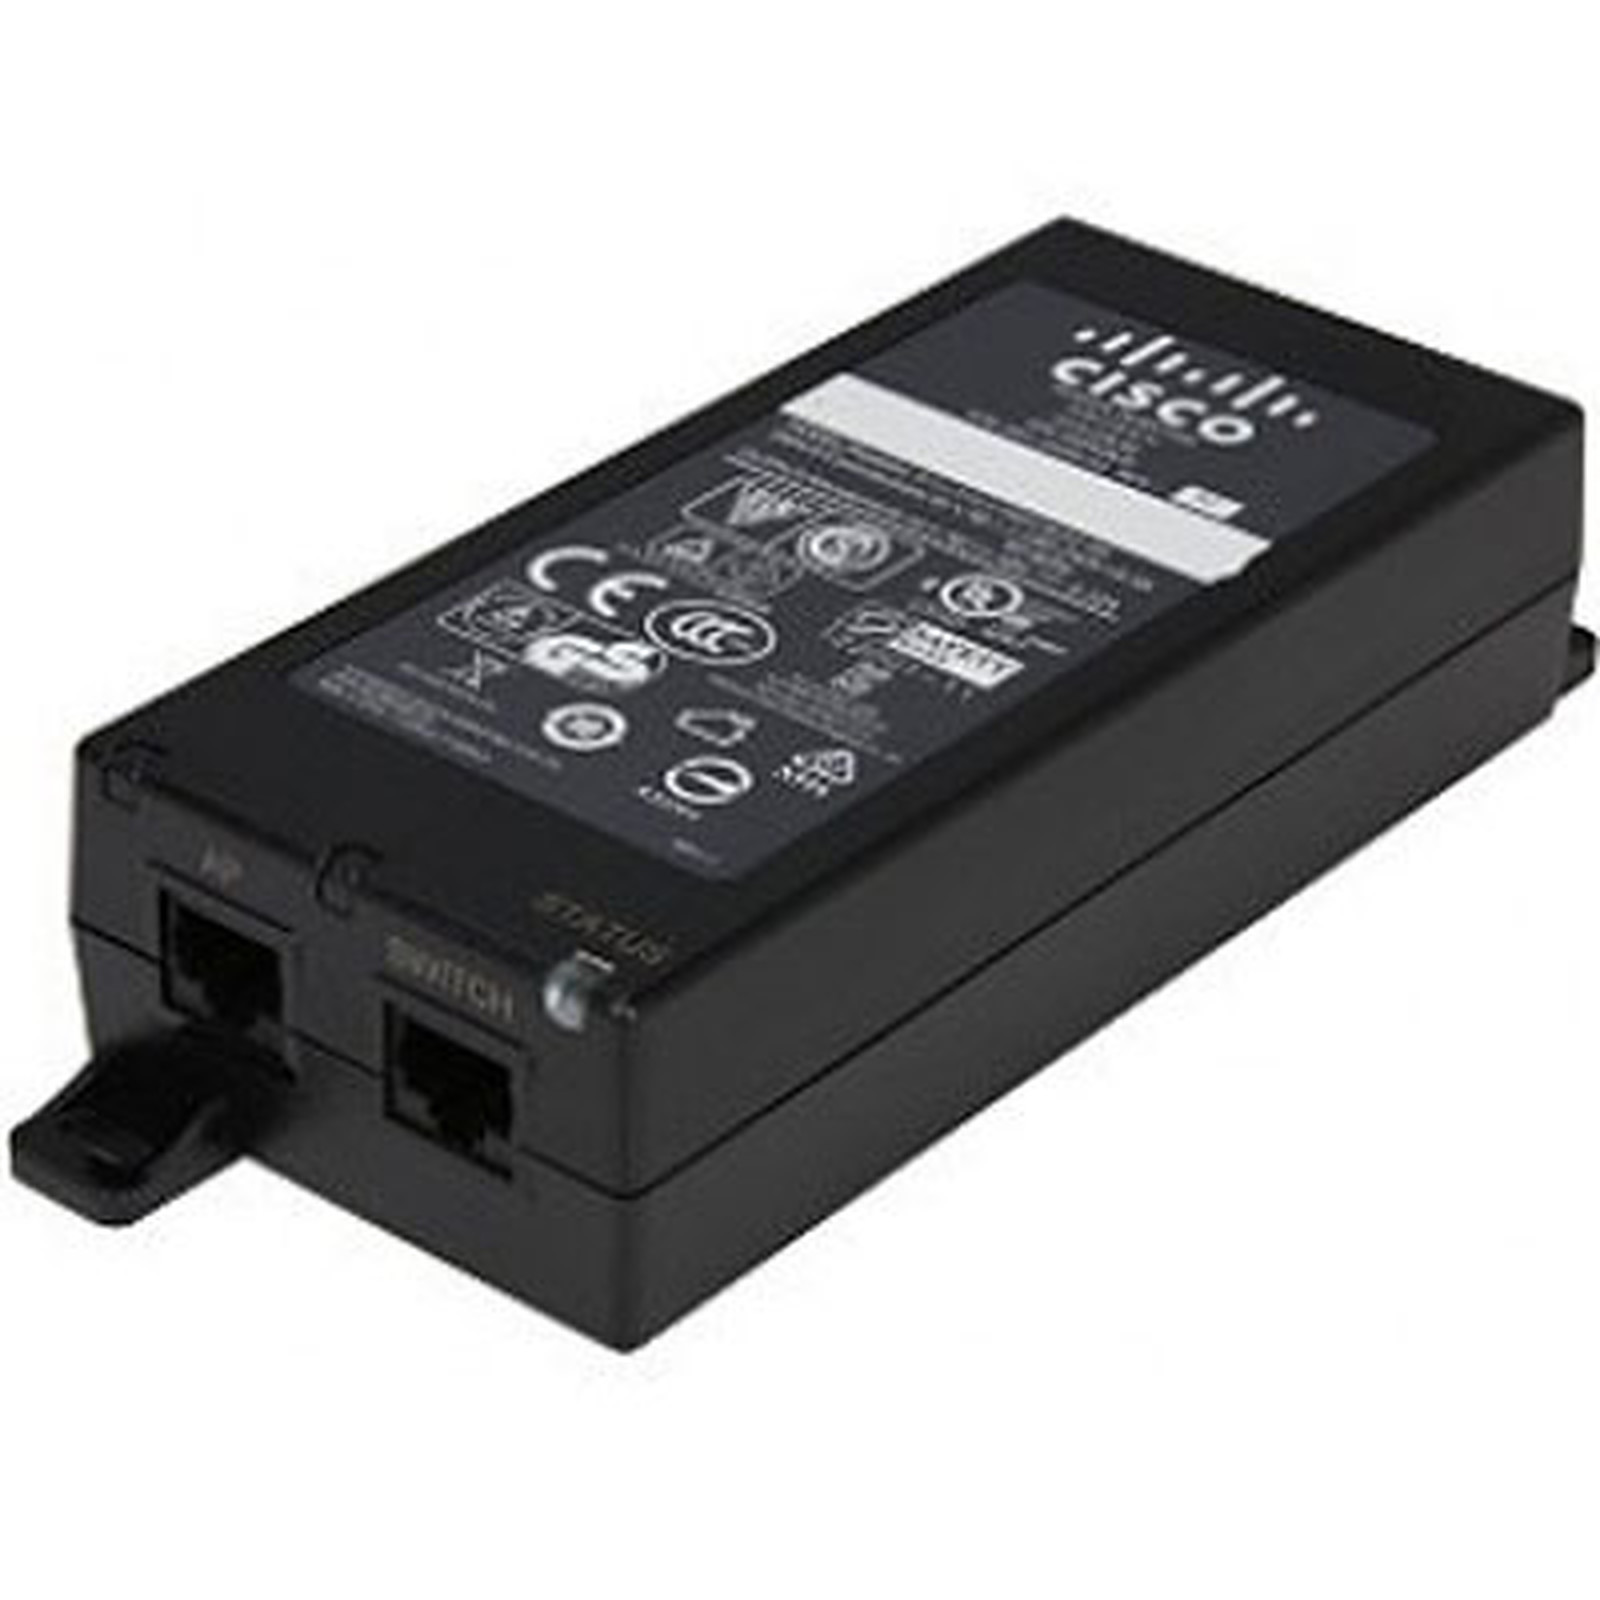 Cisco AIR-PWRINJ5 Power Injector pour gamme Aironet - Accessoires WiFi Cisco Systems - Occasion